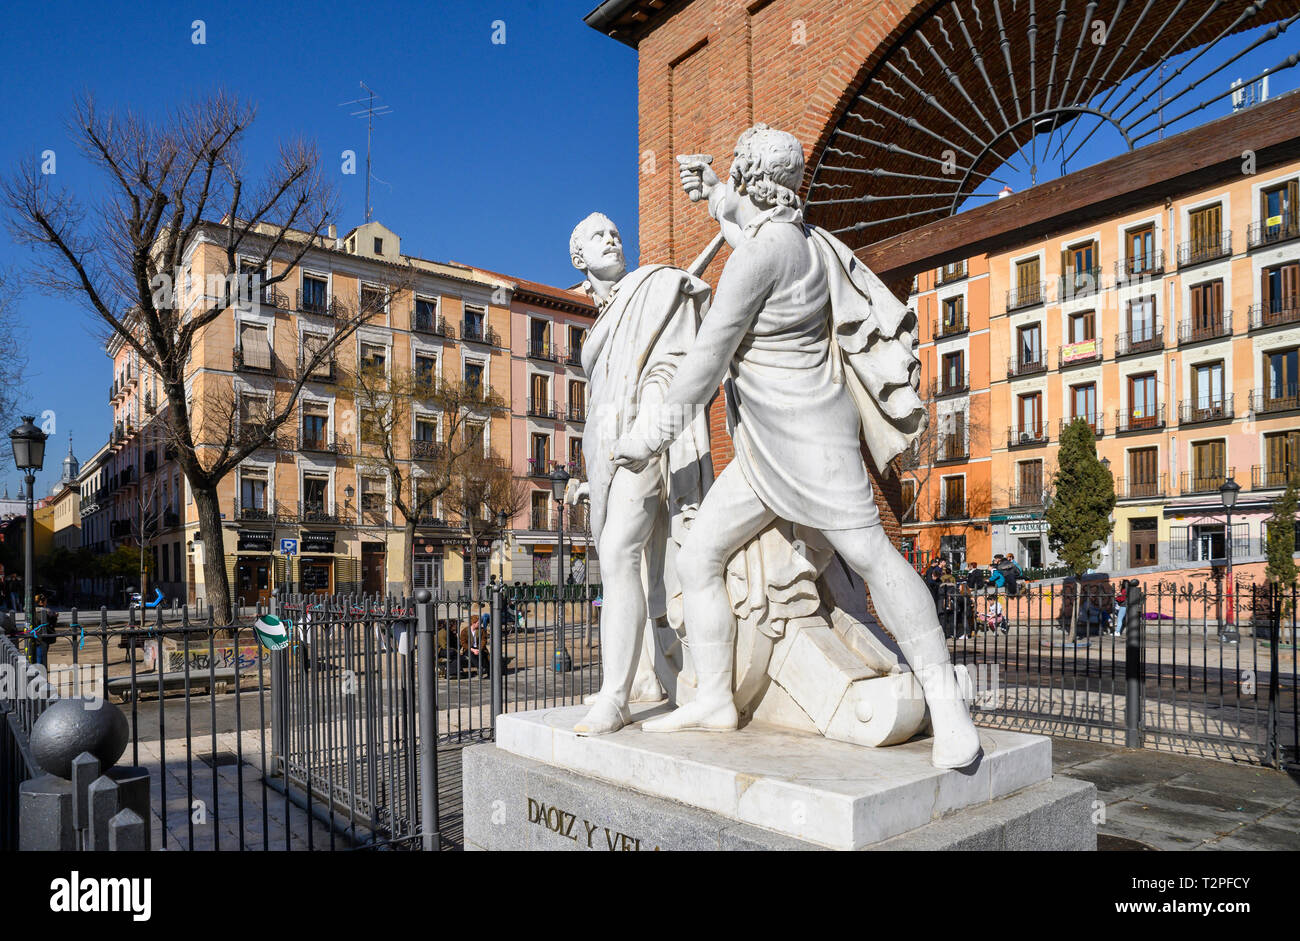 Monument to Luis Daoíz and Pedro Velarde, heros of the Spanish war of independence, in the Plaza dos de Mayo in the heart of the Malasana disrict, cen Stock Photo